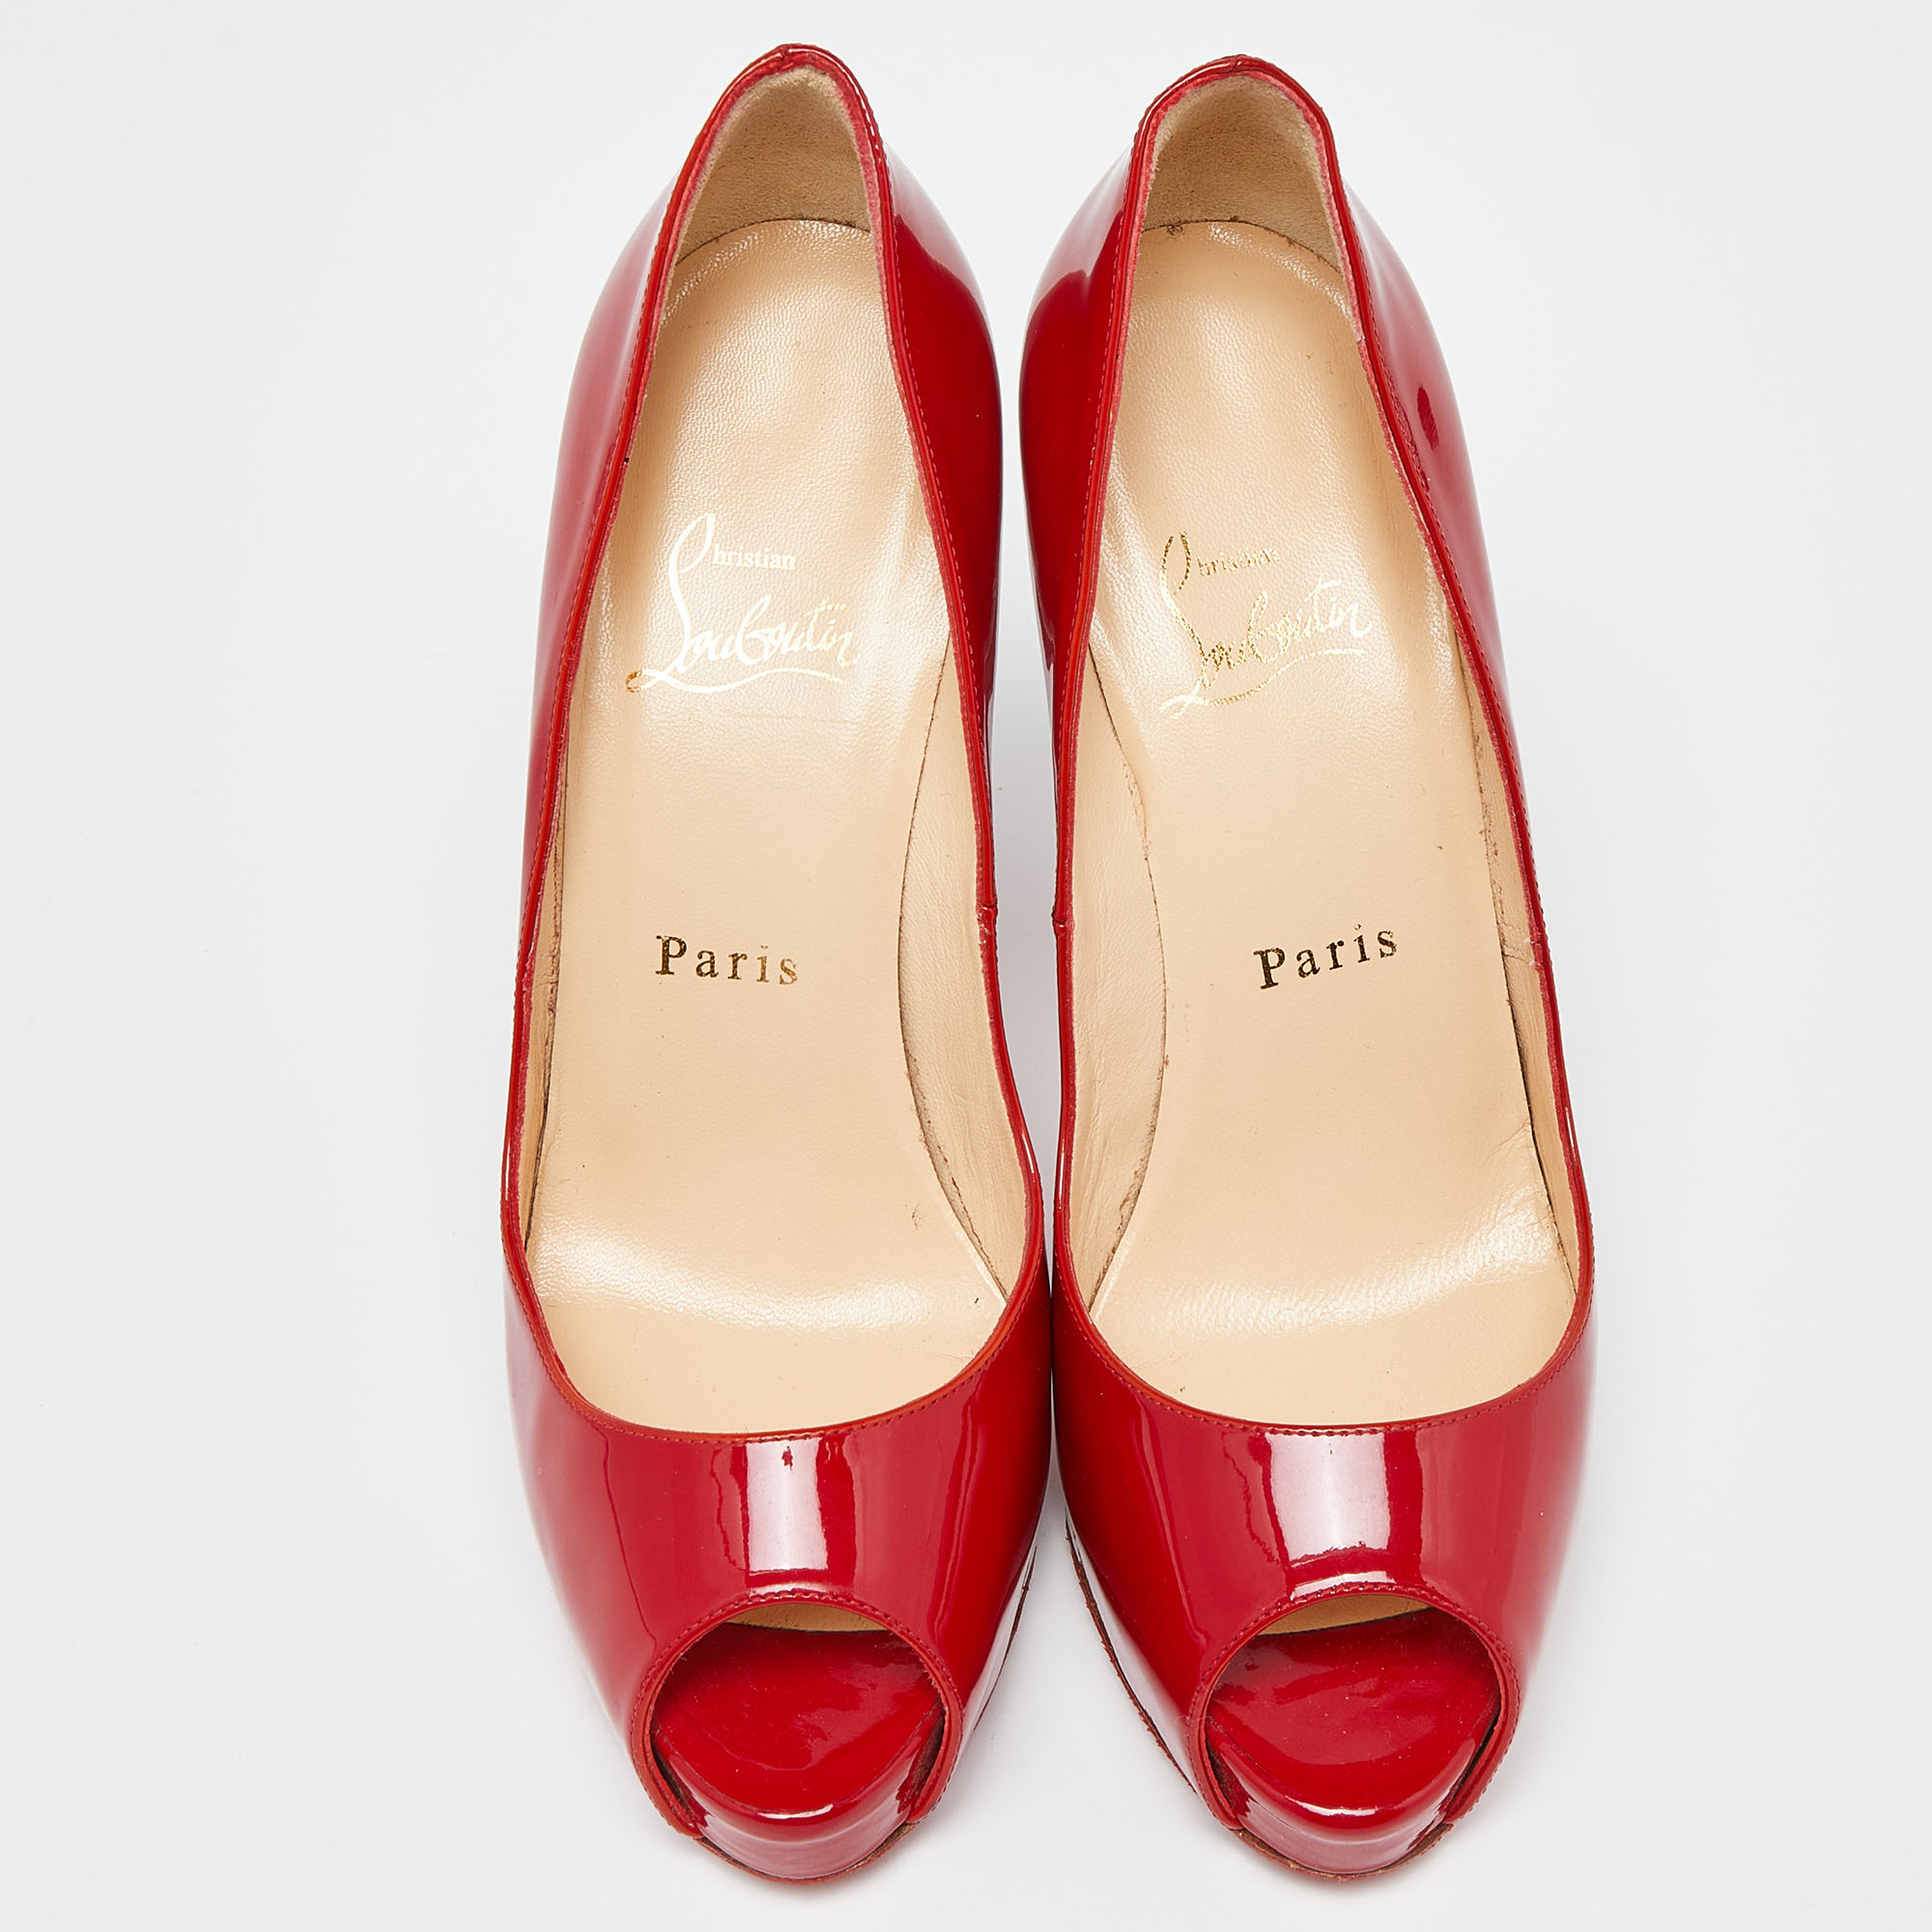 Christian Louboutin Red Patent Leather Very Prive Platform Peep Toe Pumps Size 37.5